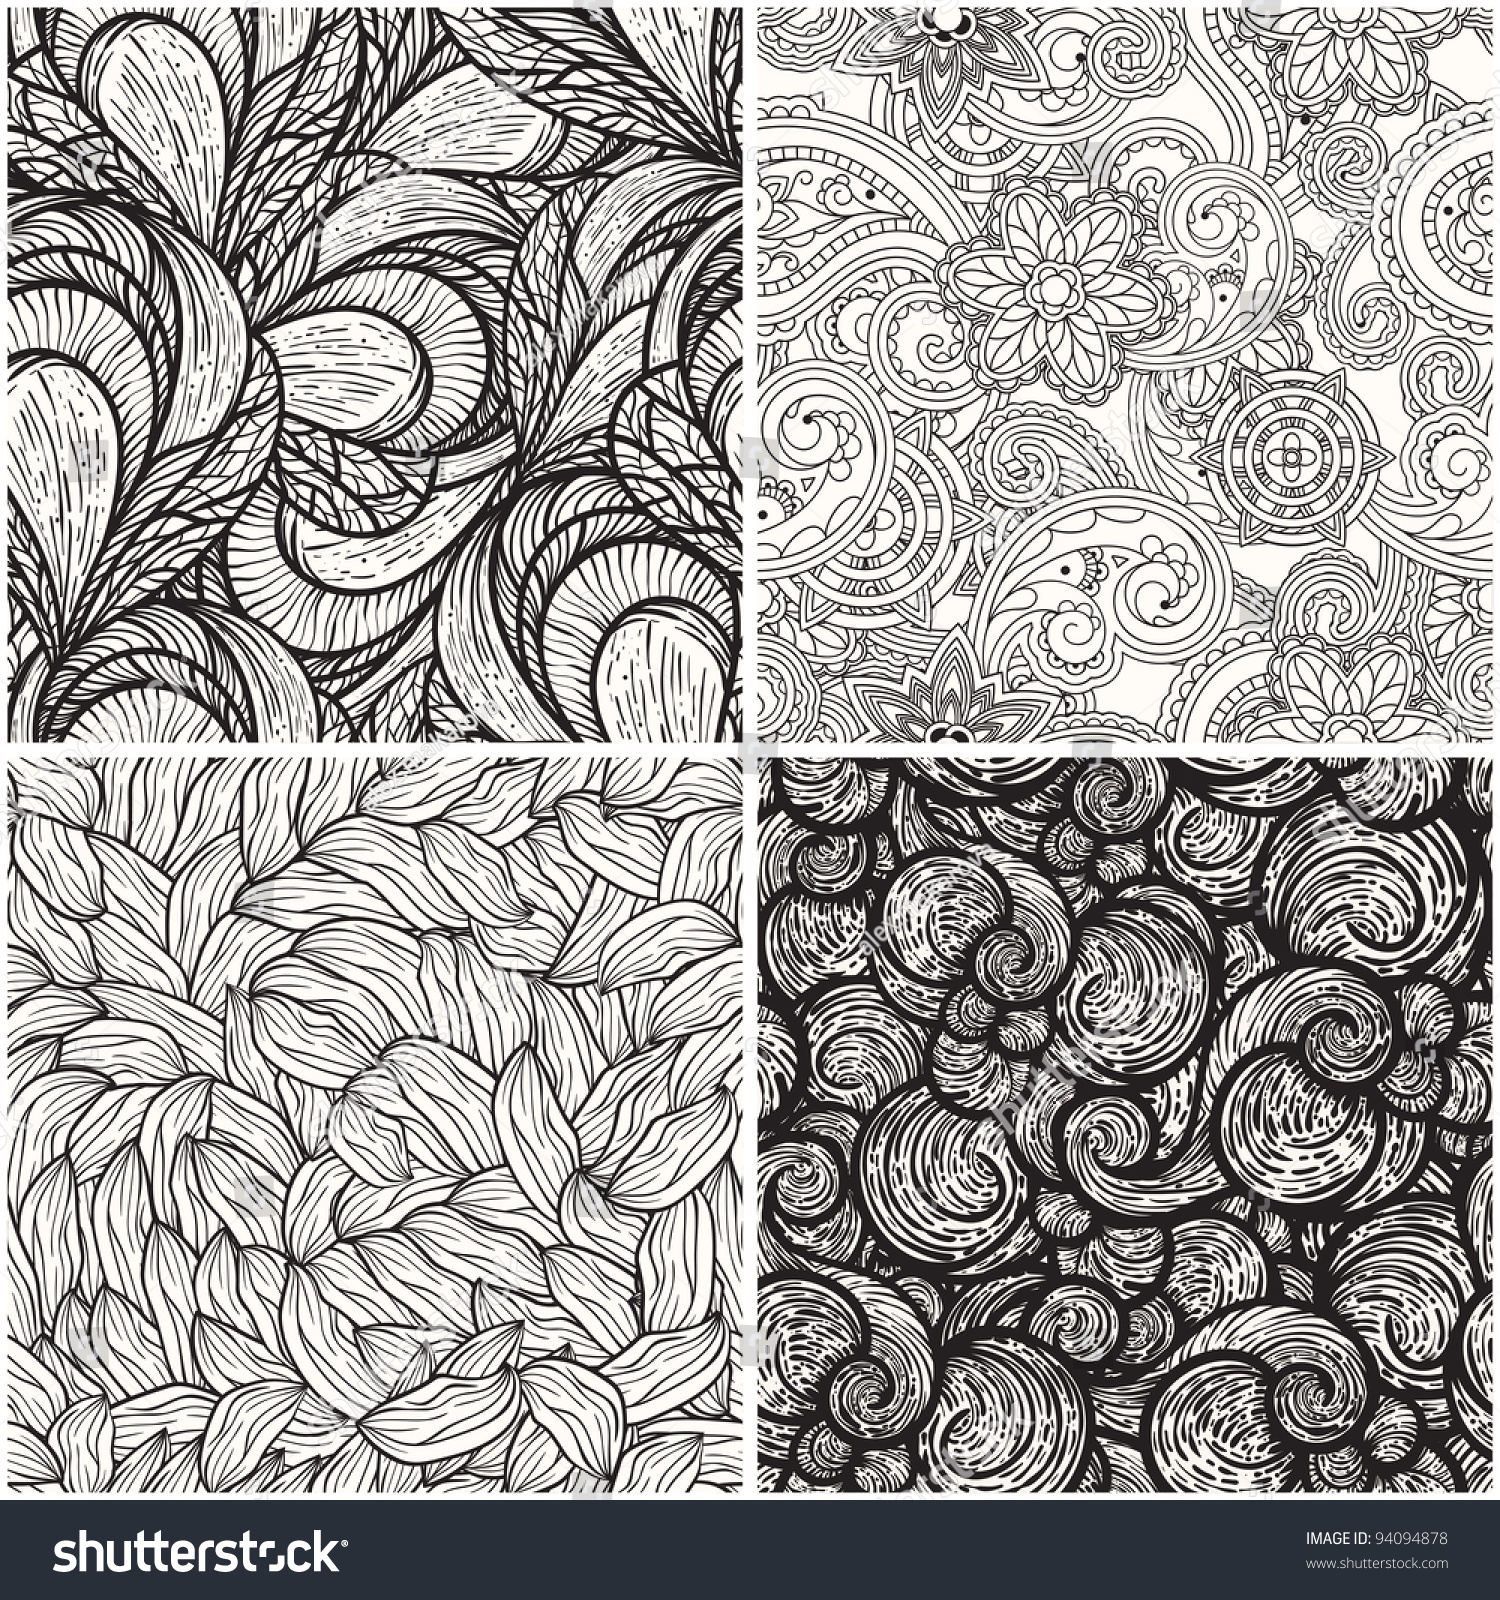 Vector Set With Monochrome Seamless Patterns - 94094878 : Shutterstock